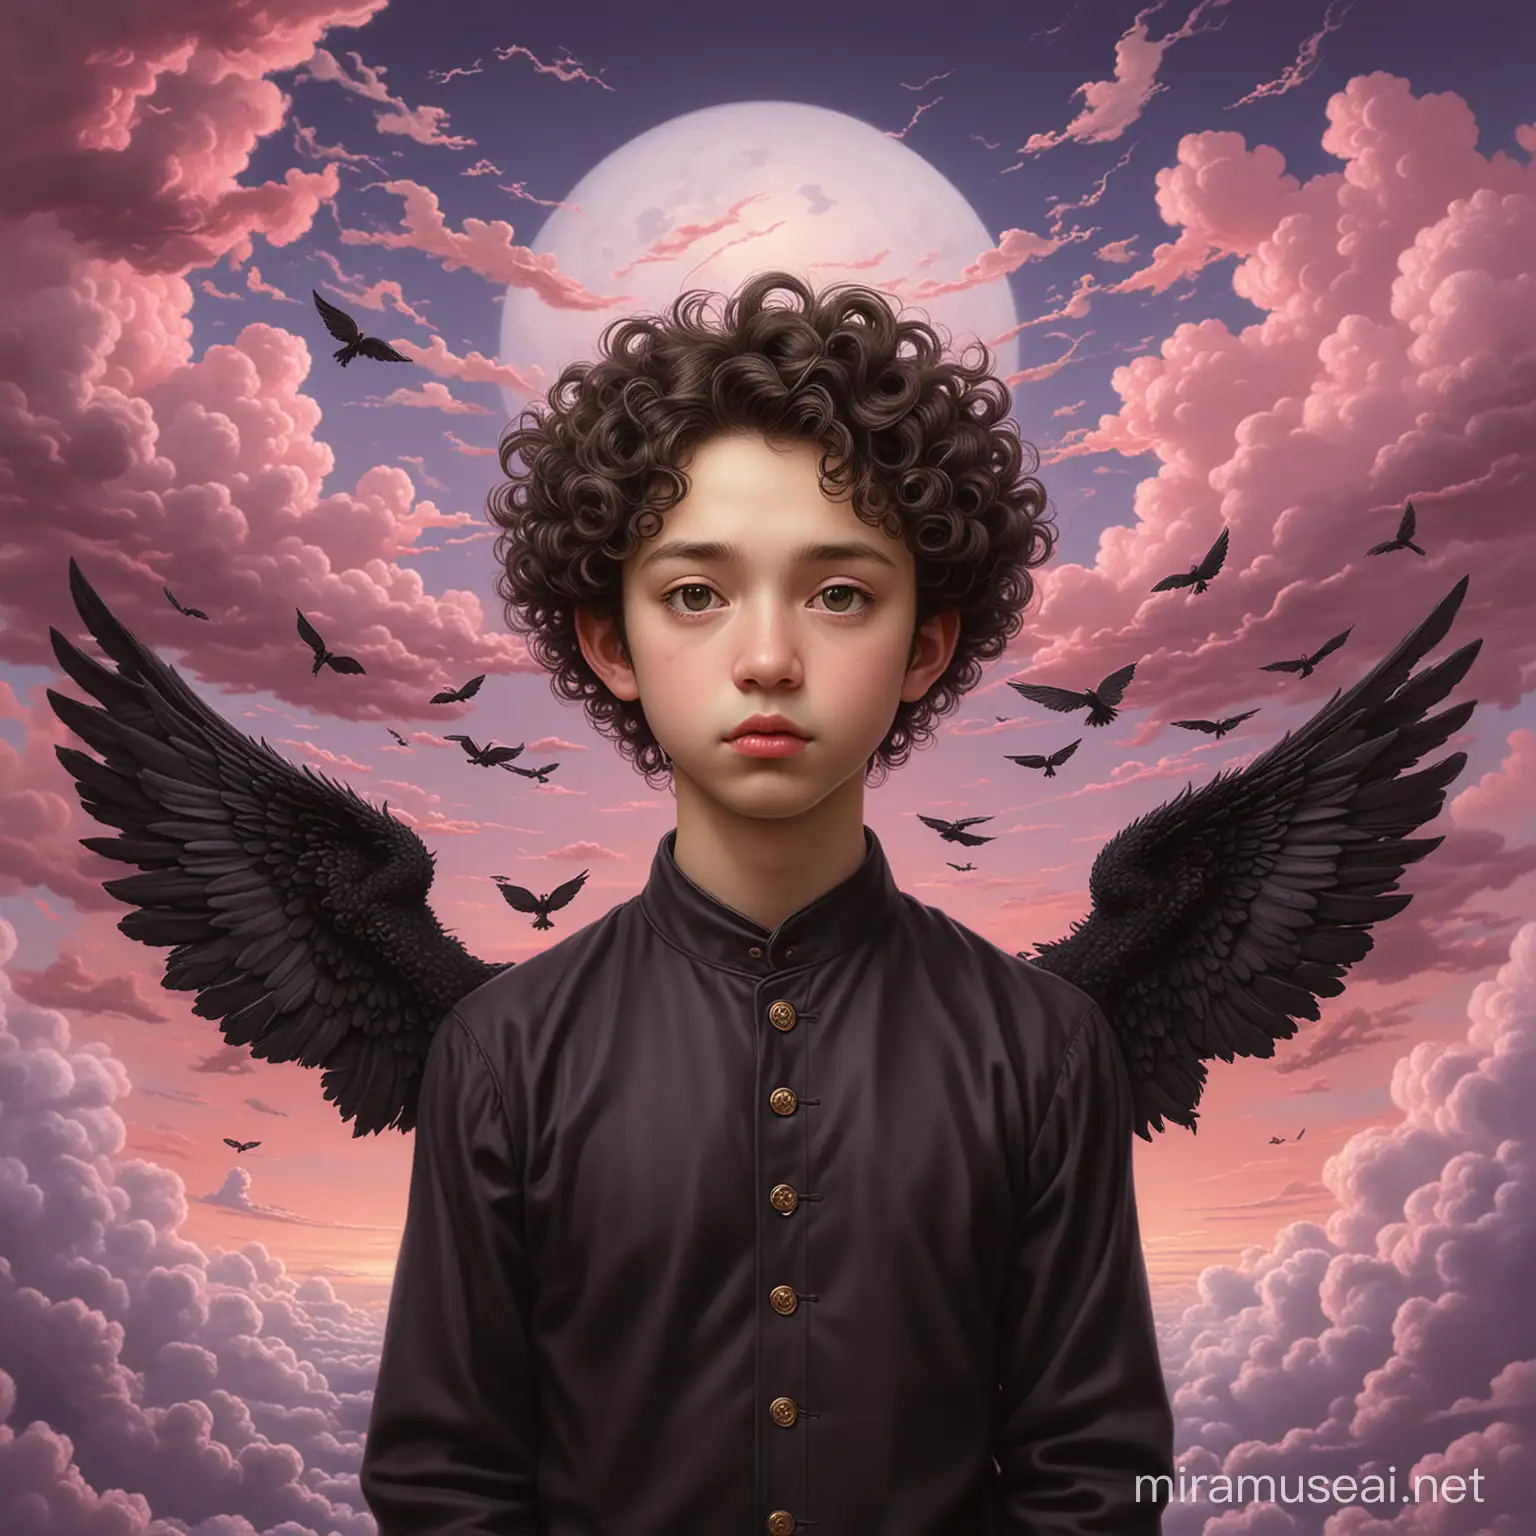 CurlyHaired Young Man with Black Wings in Mark Ryden Style